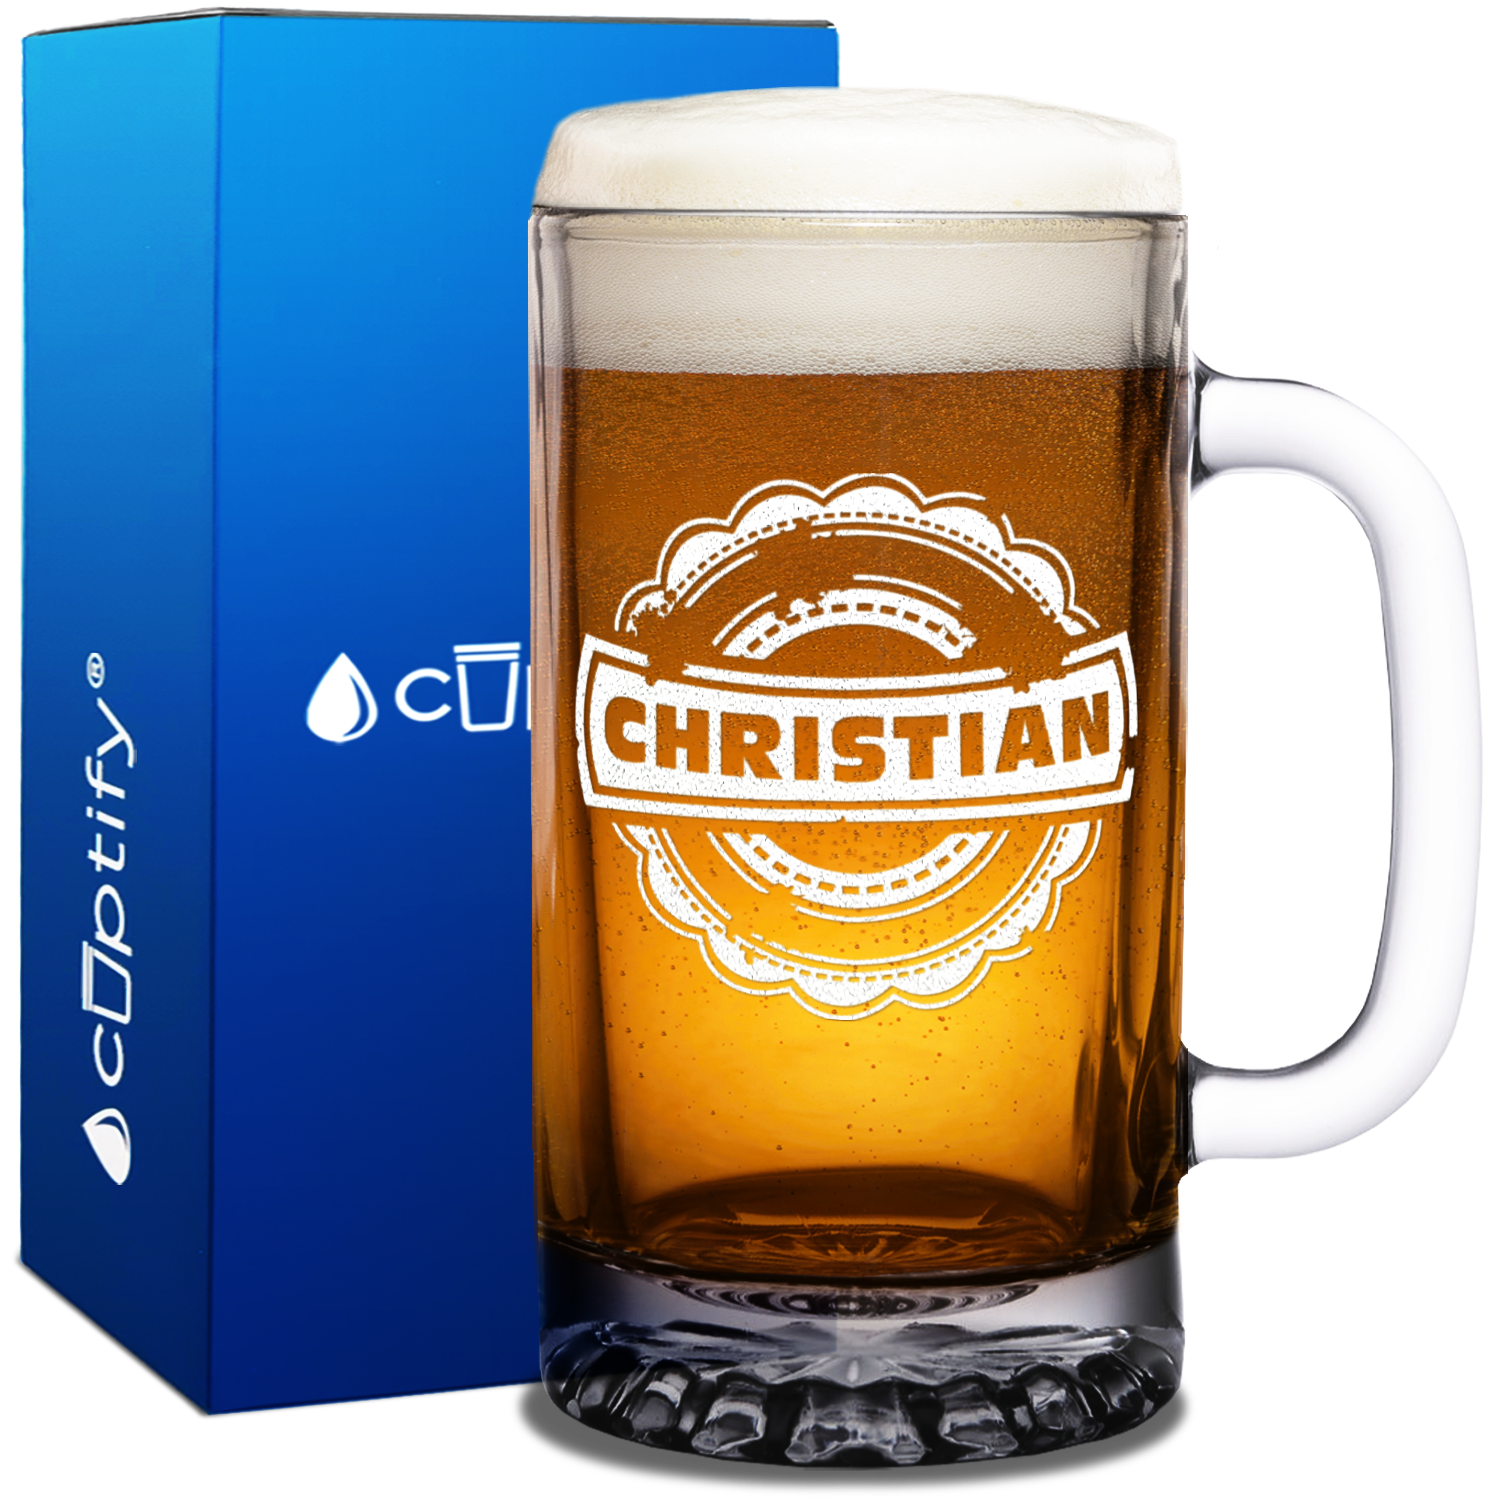 Personalized Asperous Etched 16oz Beer Glass Mug